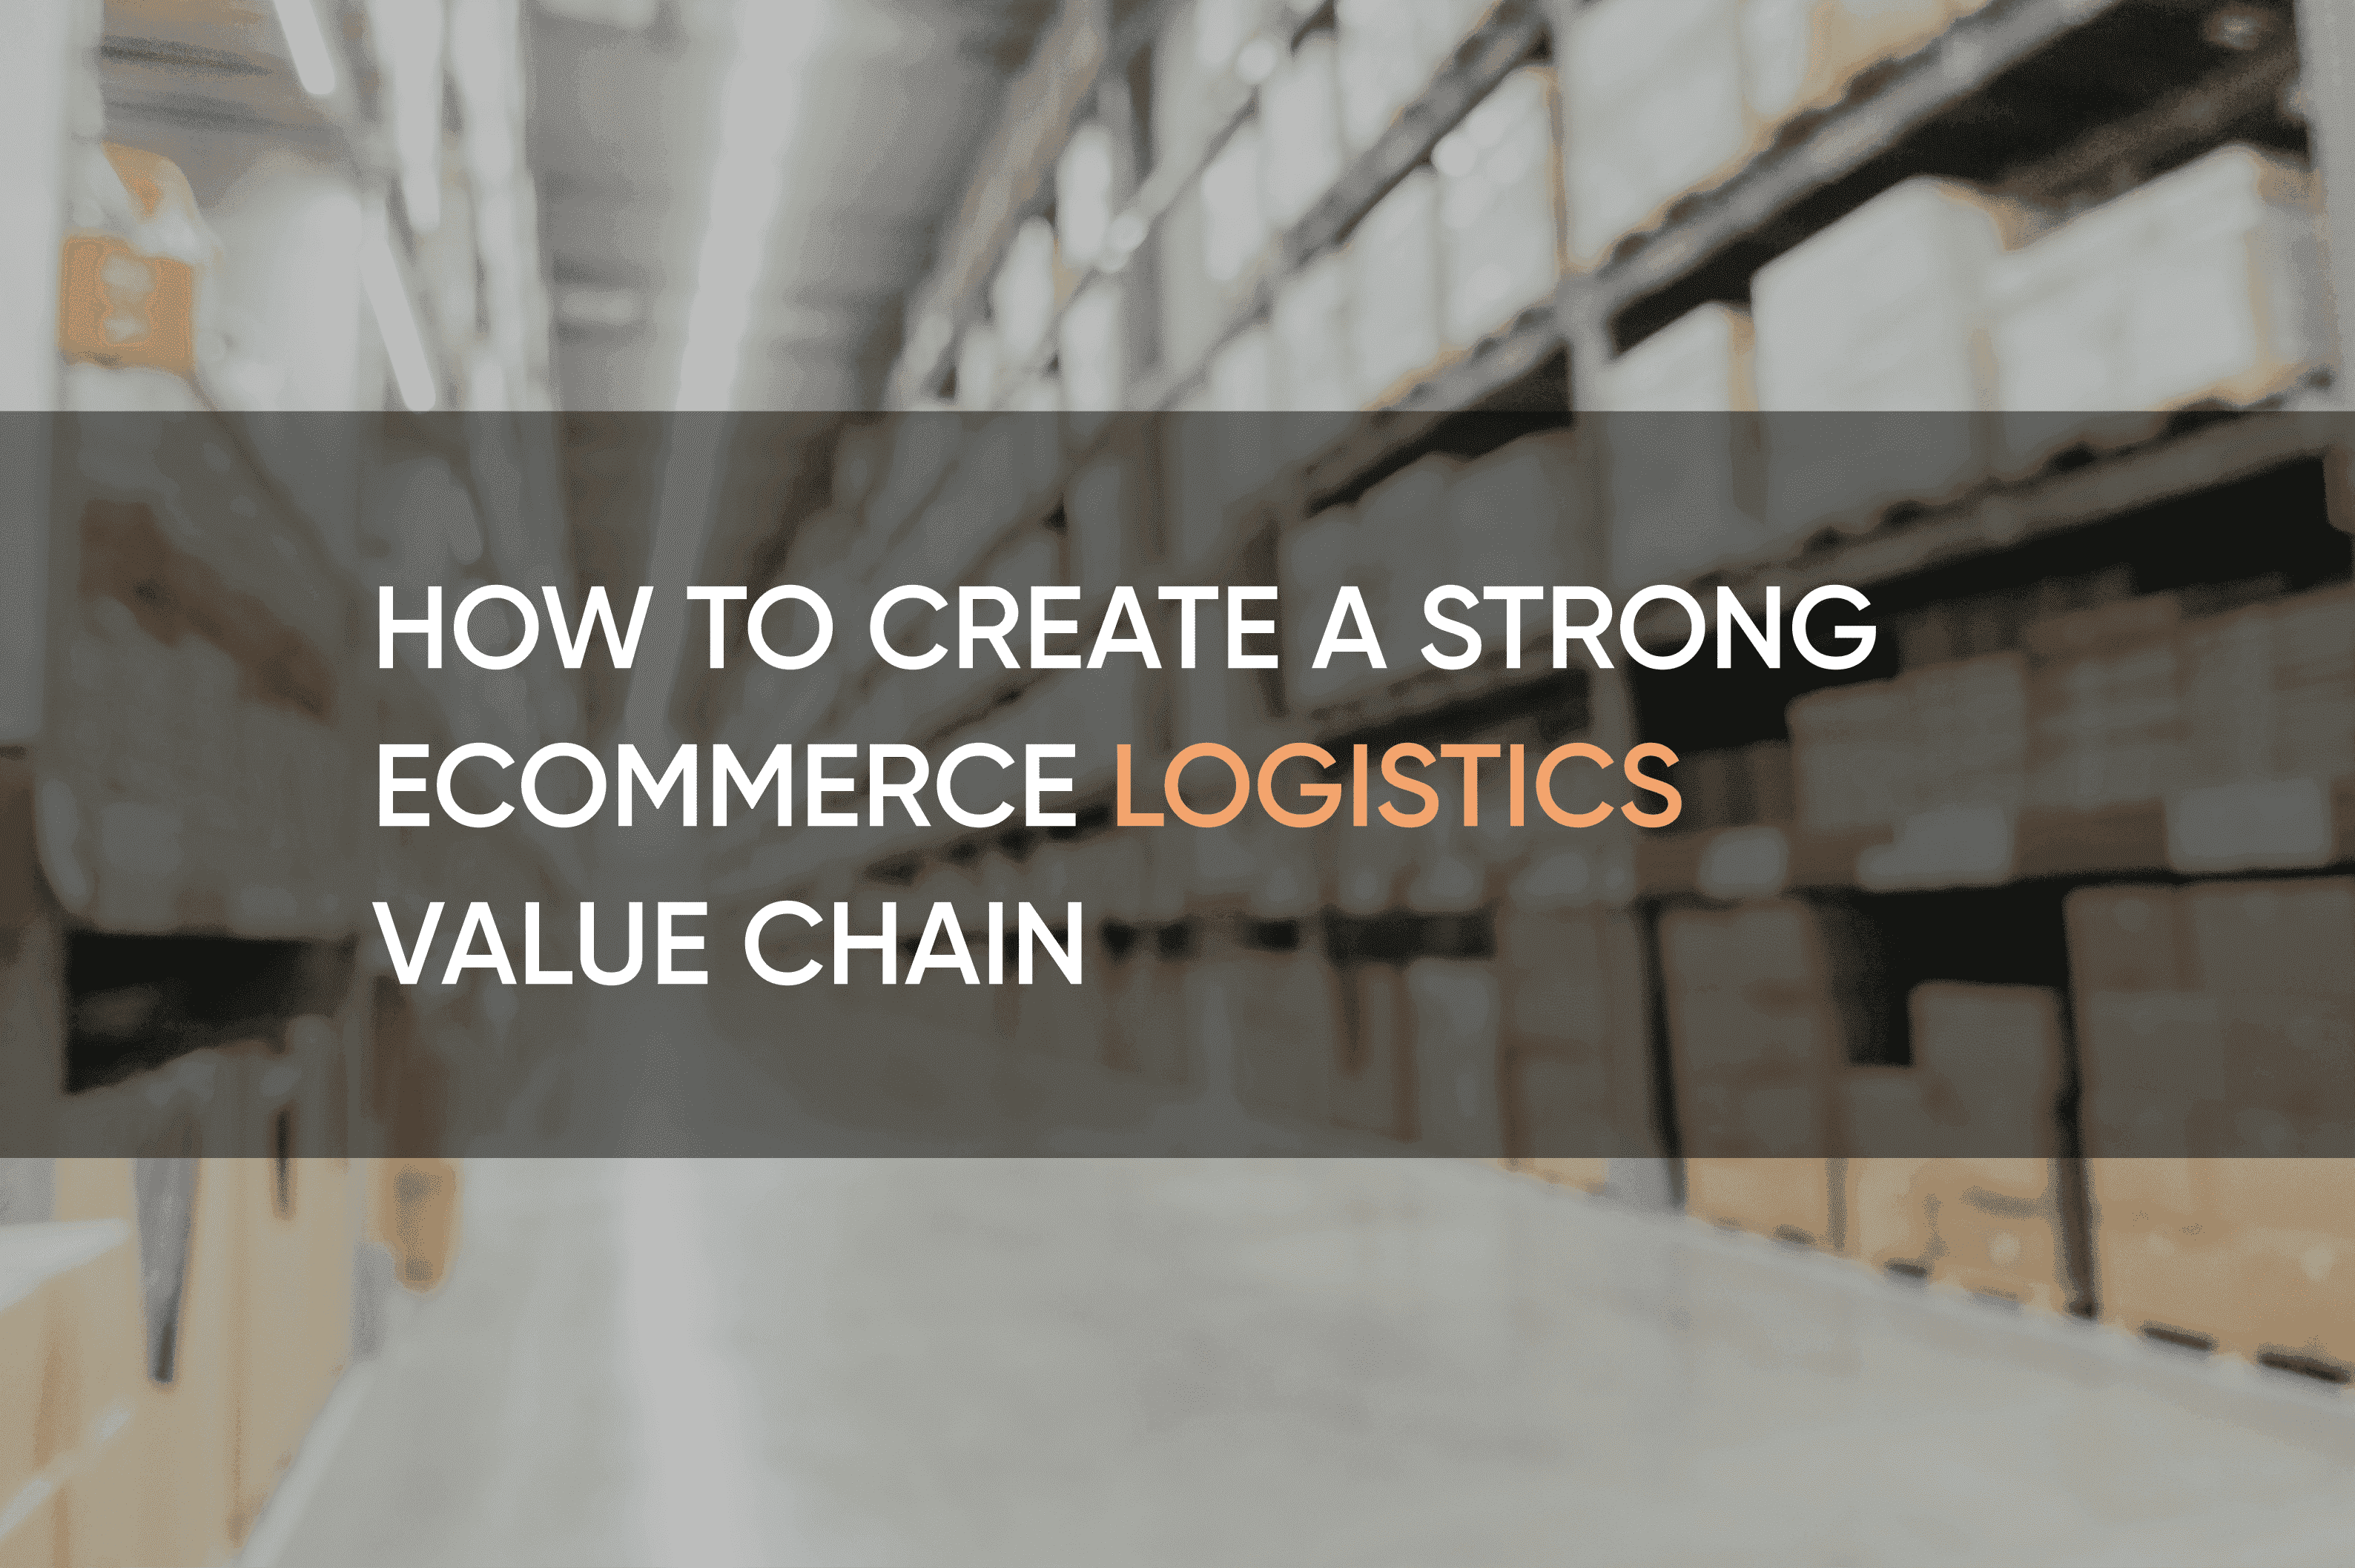 How To Create a Strong eCommerce Logistics Value Chain | SolidBrain